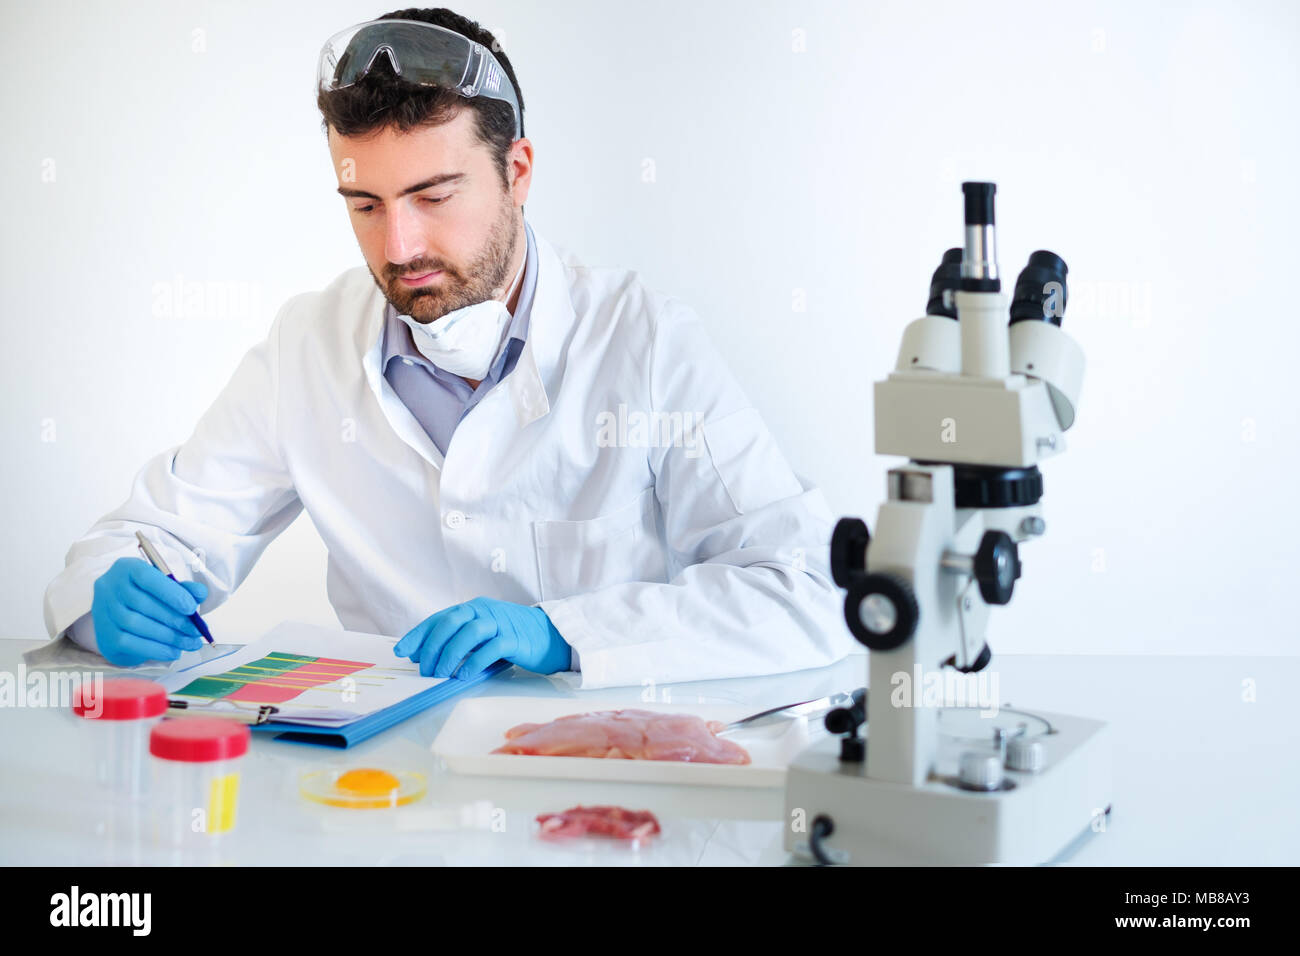 Researcher wearing safety goggles and white coat analyzing quality of GMO meat sample while standing at modern laboratory Stock Photo